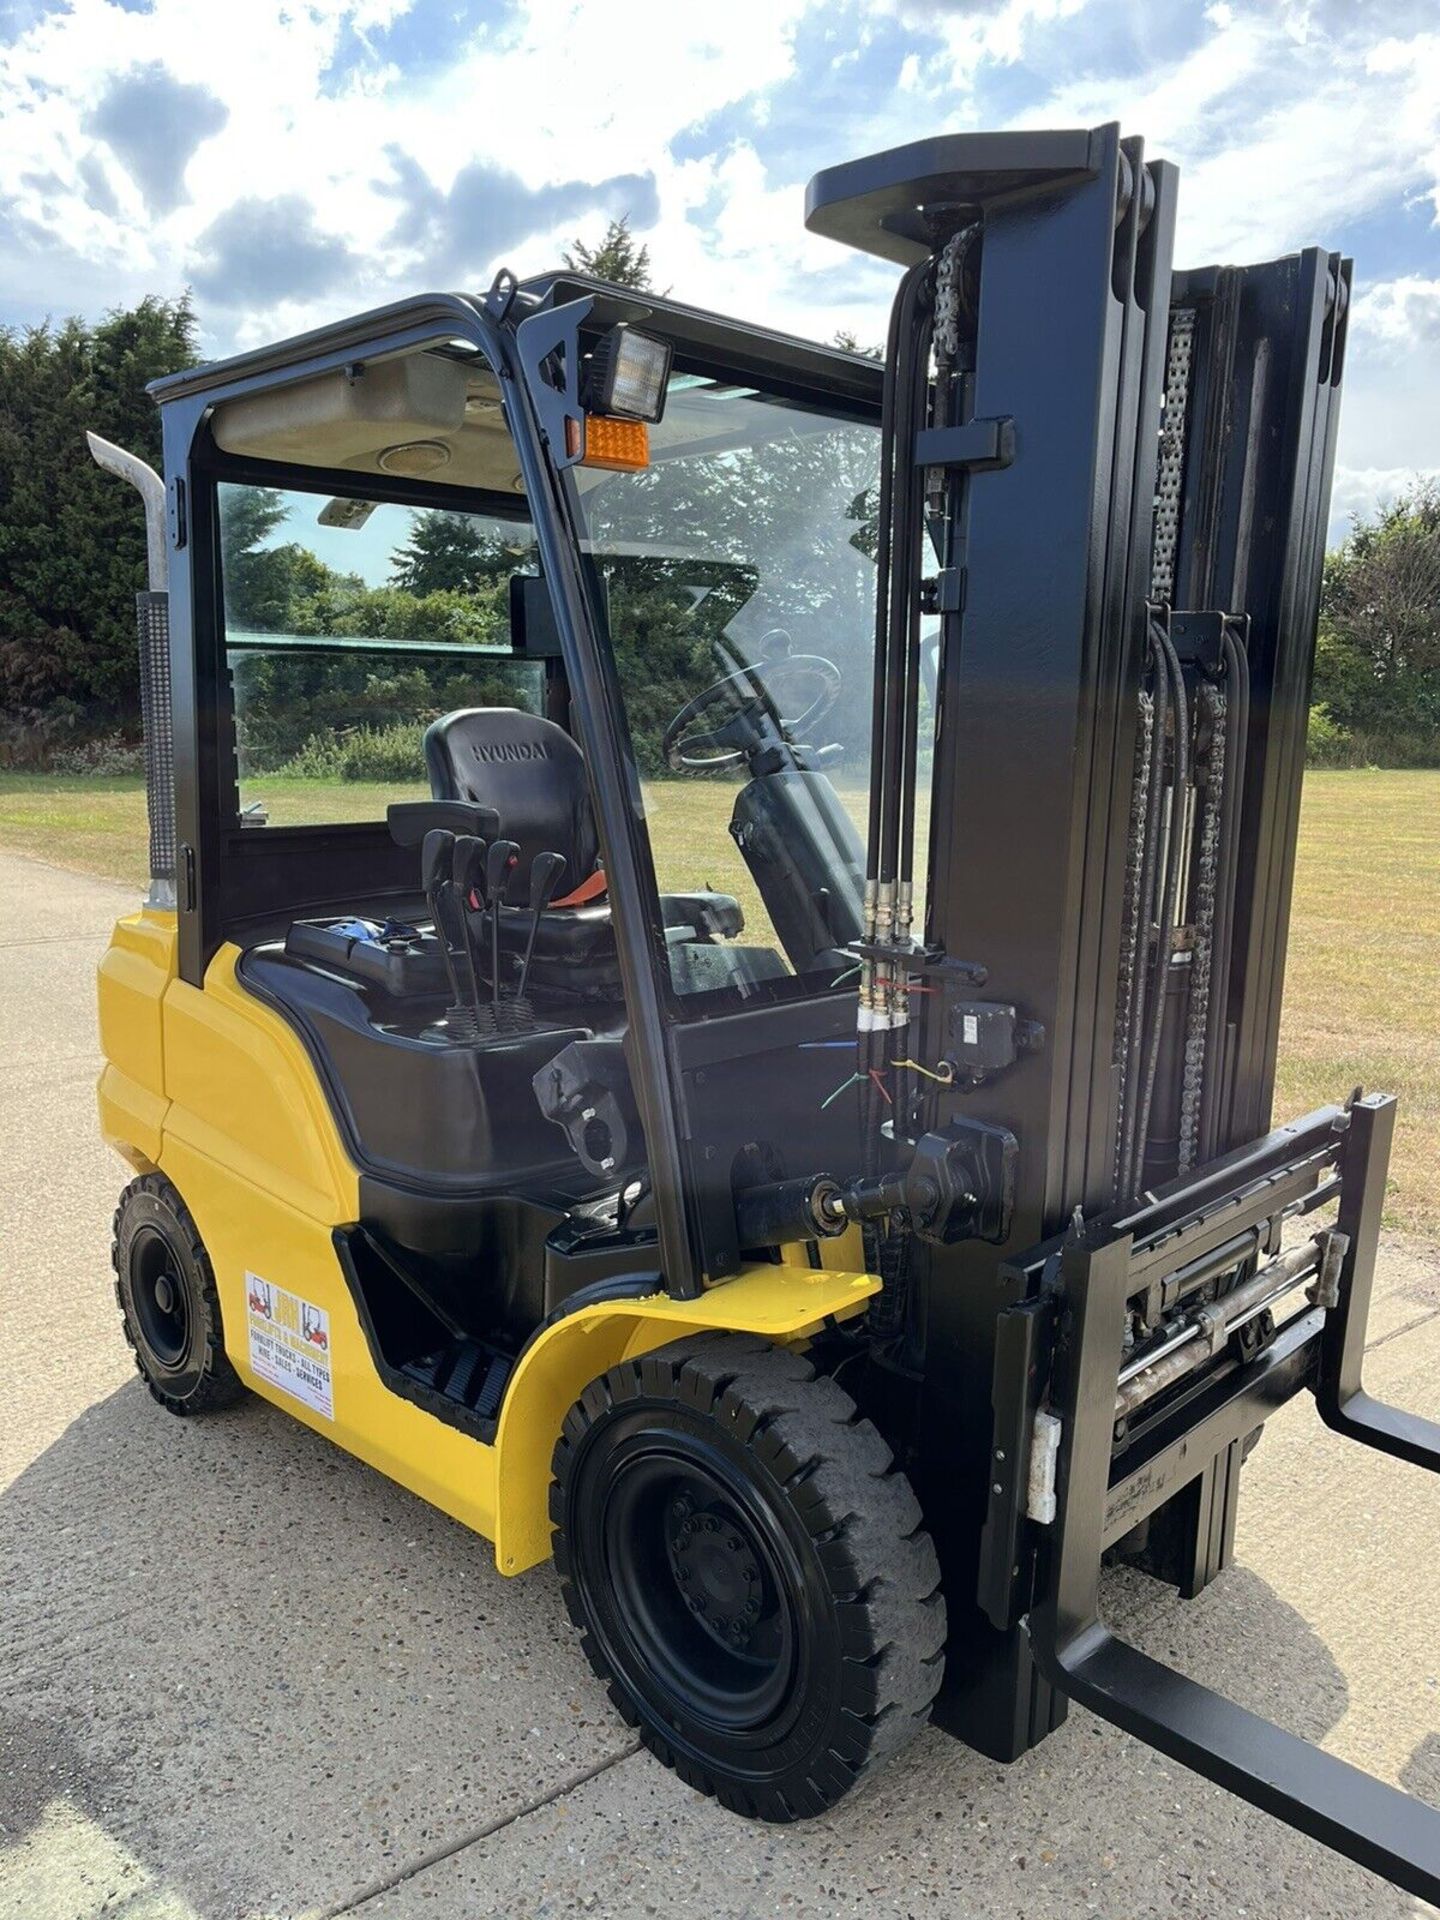 Hyundai 2.5 Diesel Forklift Container Spec 2015 - Image 8 of 10